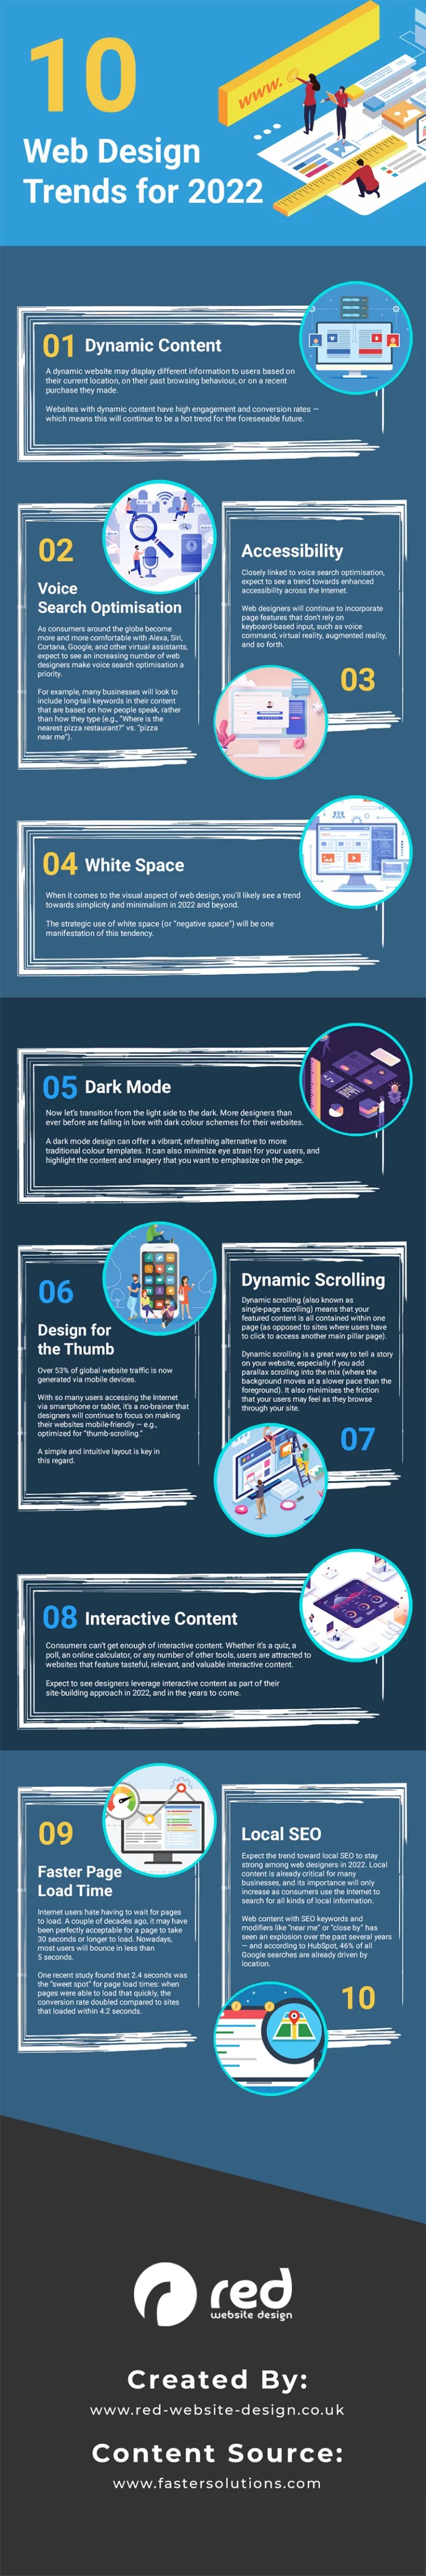 10 Web Design Trends to Watch - Infographic